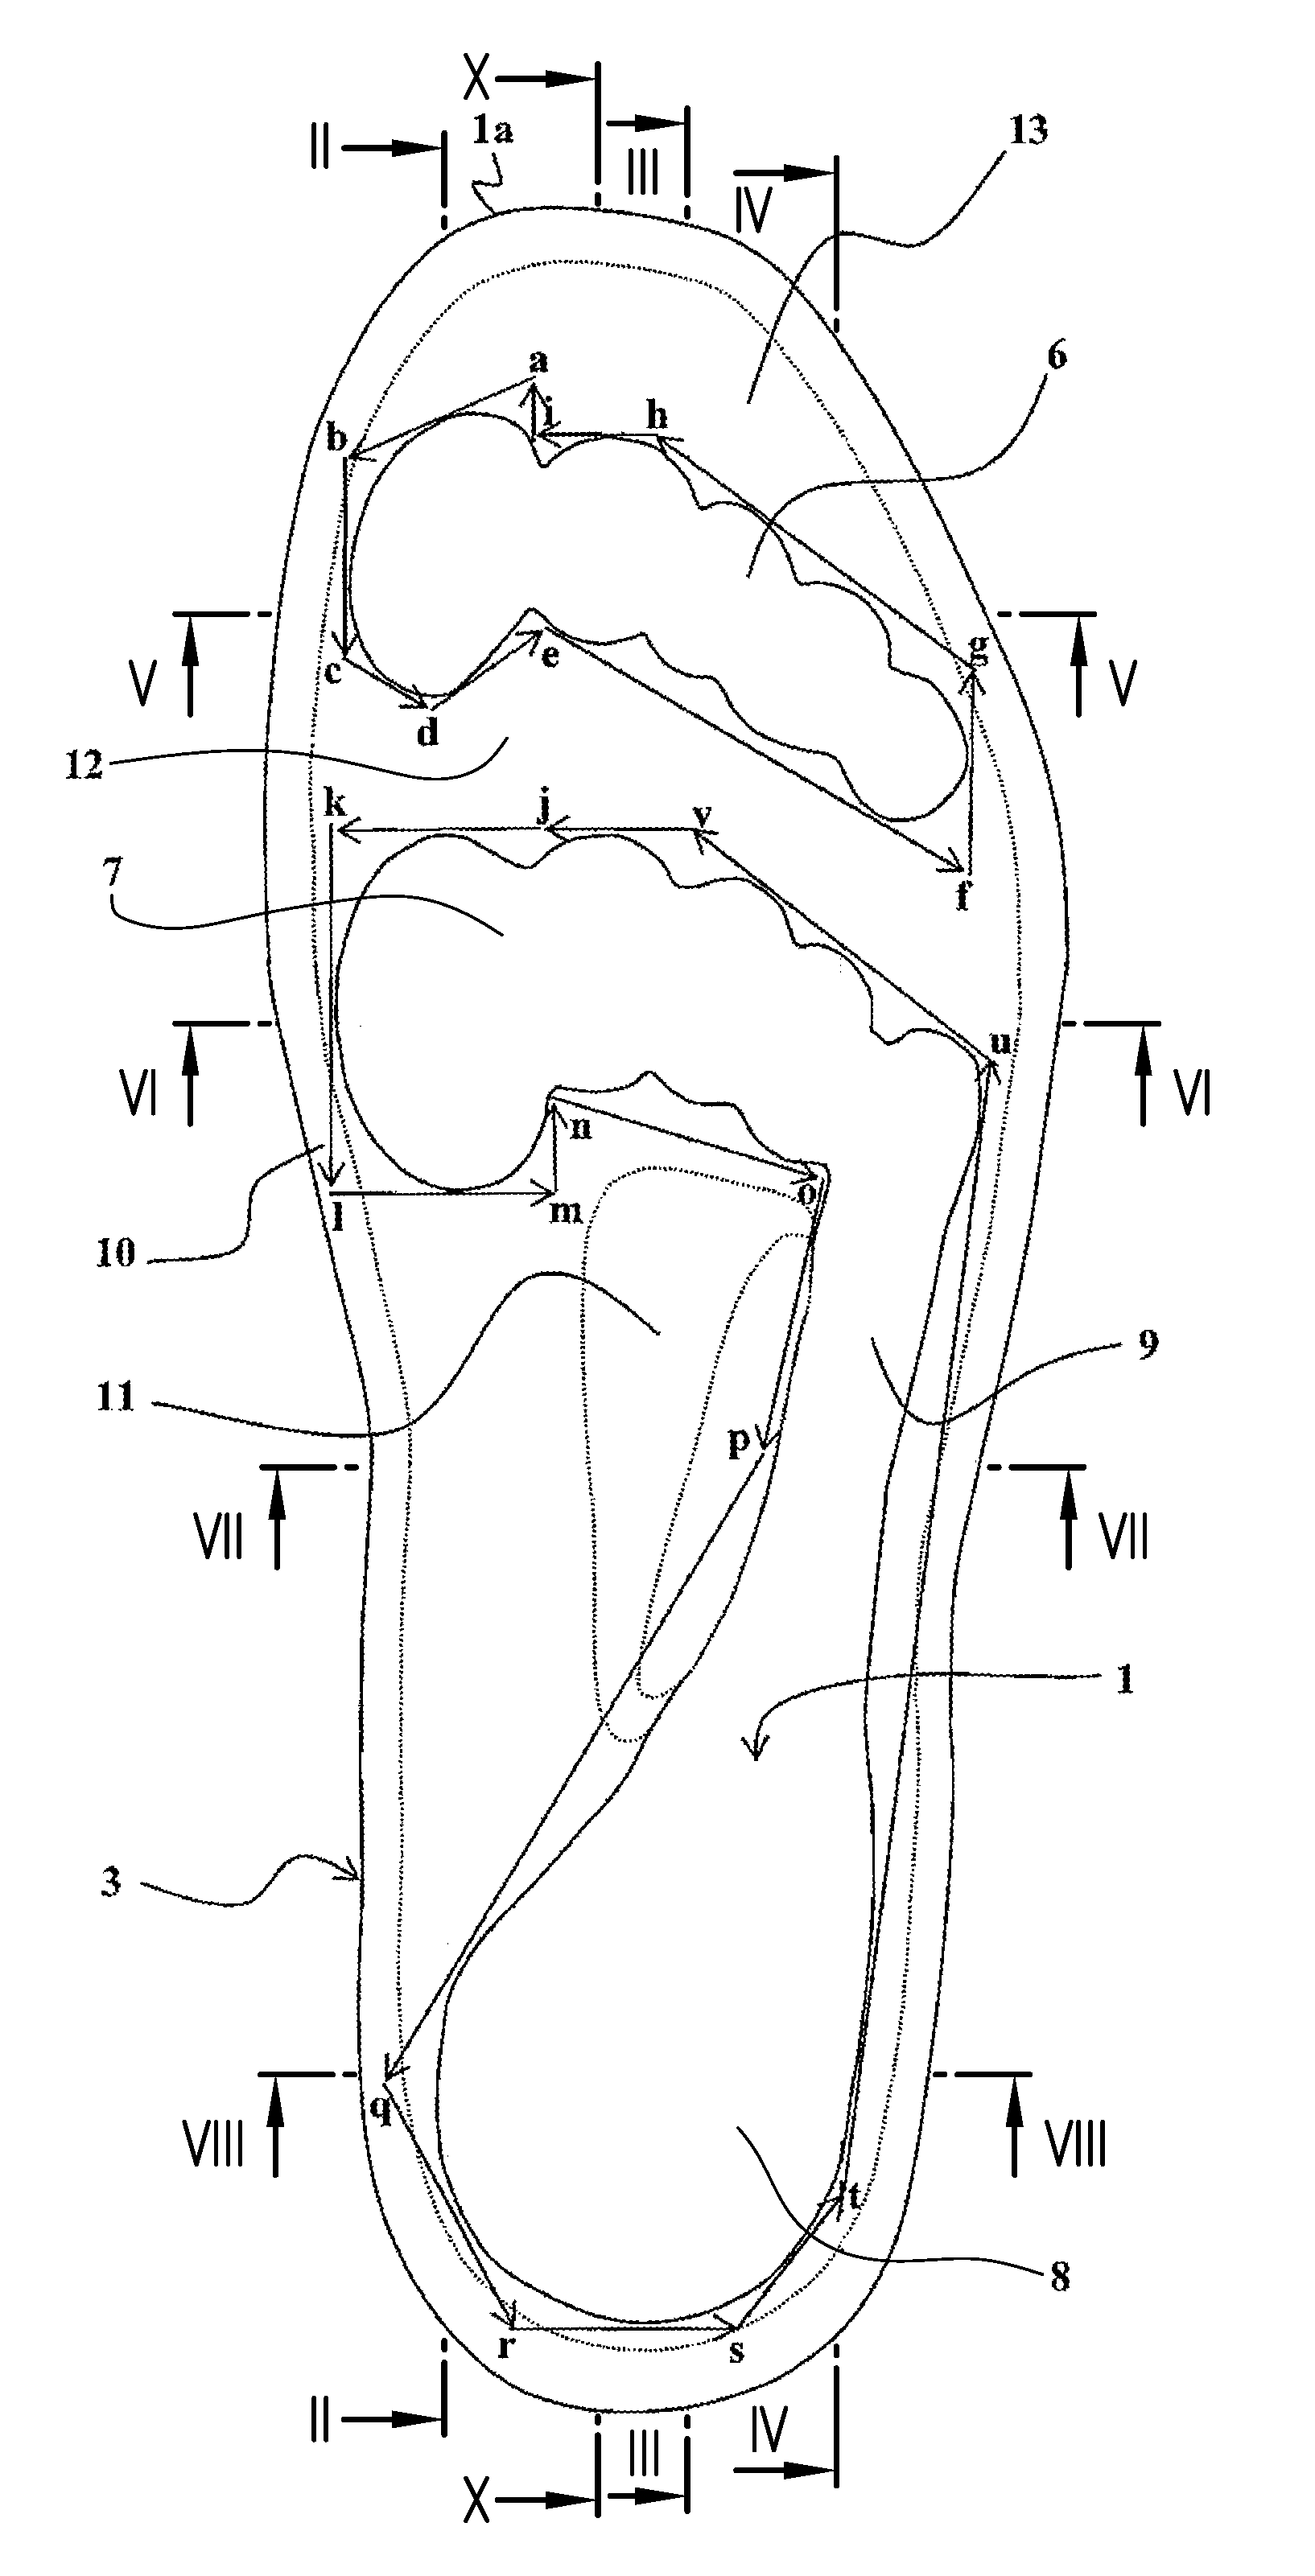 Selectively damping plantar insole